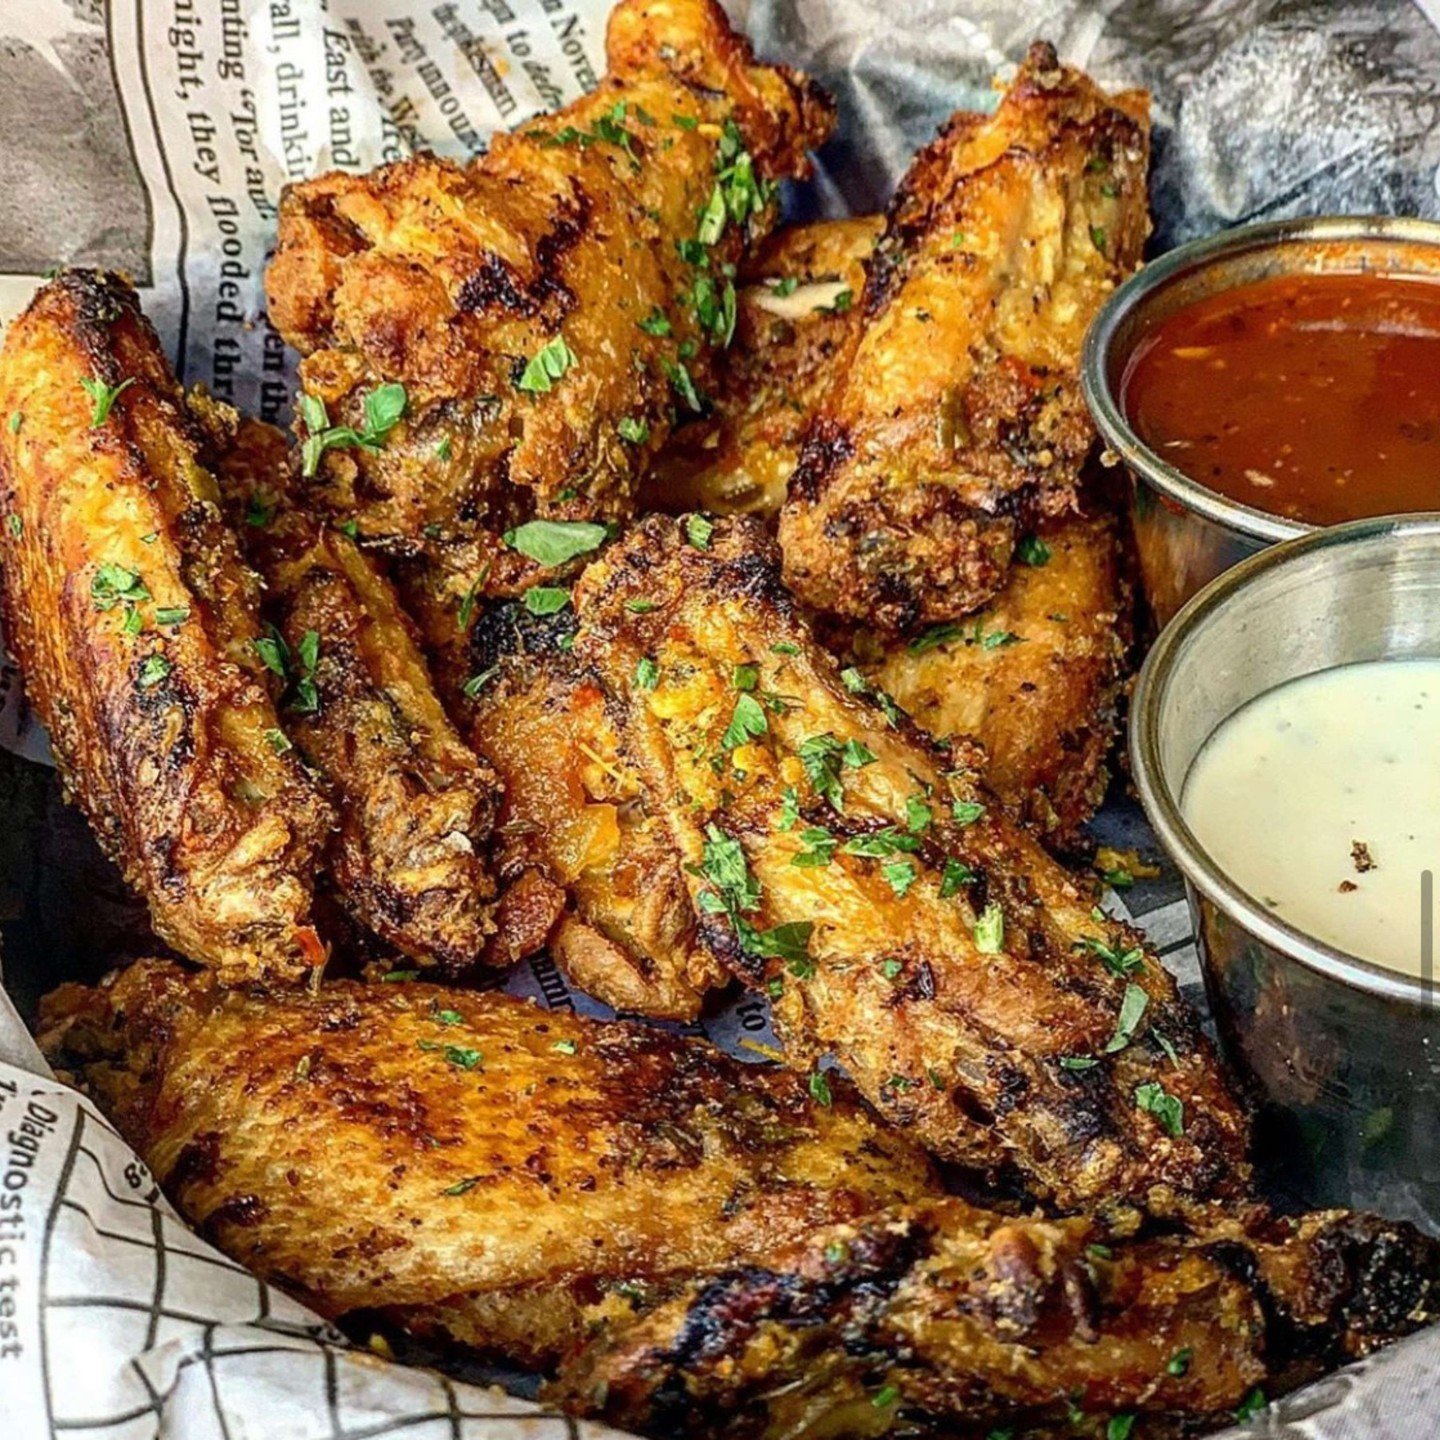 🔥 Crispy perfection from our coal-fired oven! Our chicken wings steal the show every time. 🍗✨ #CoalFiredMagic #WingWonder #PryorsPizzaKitchen